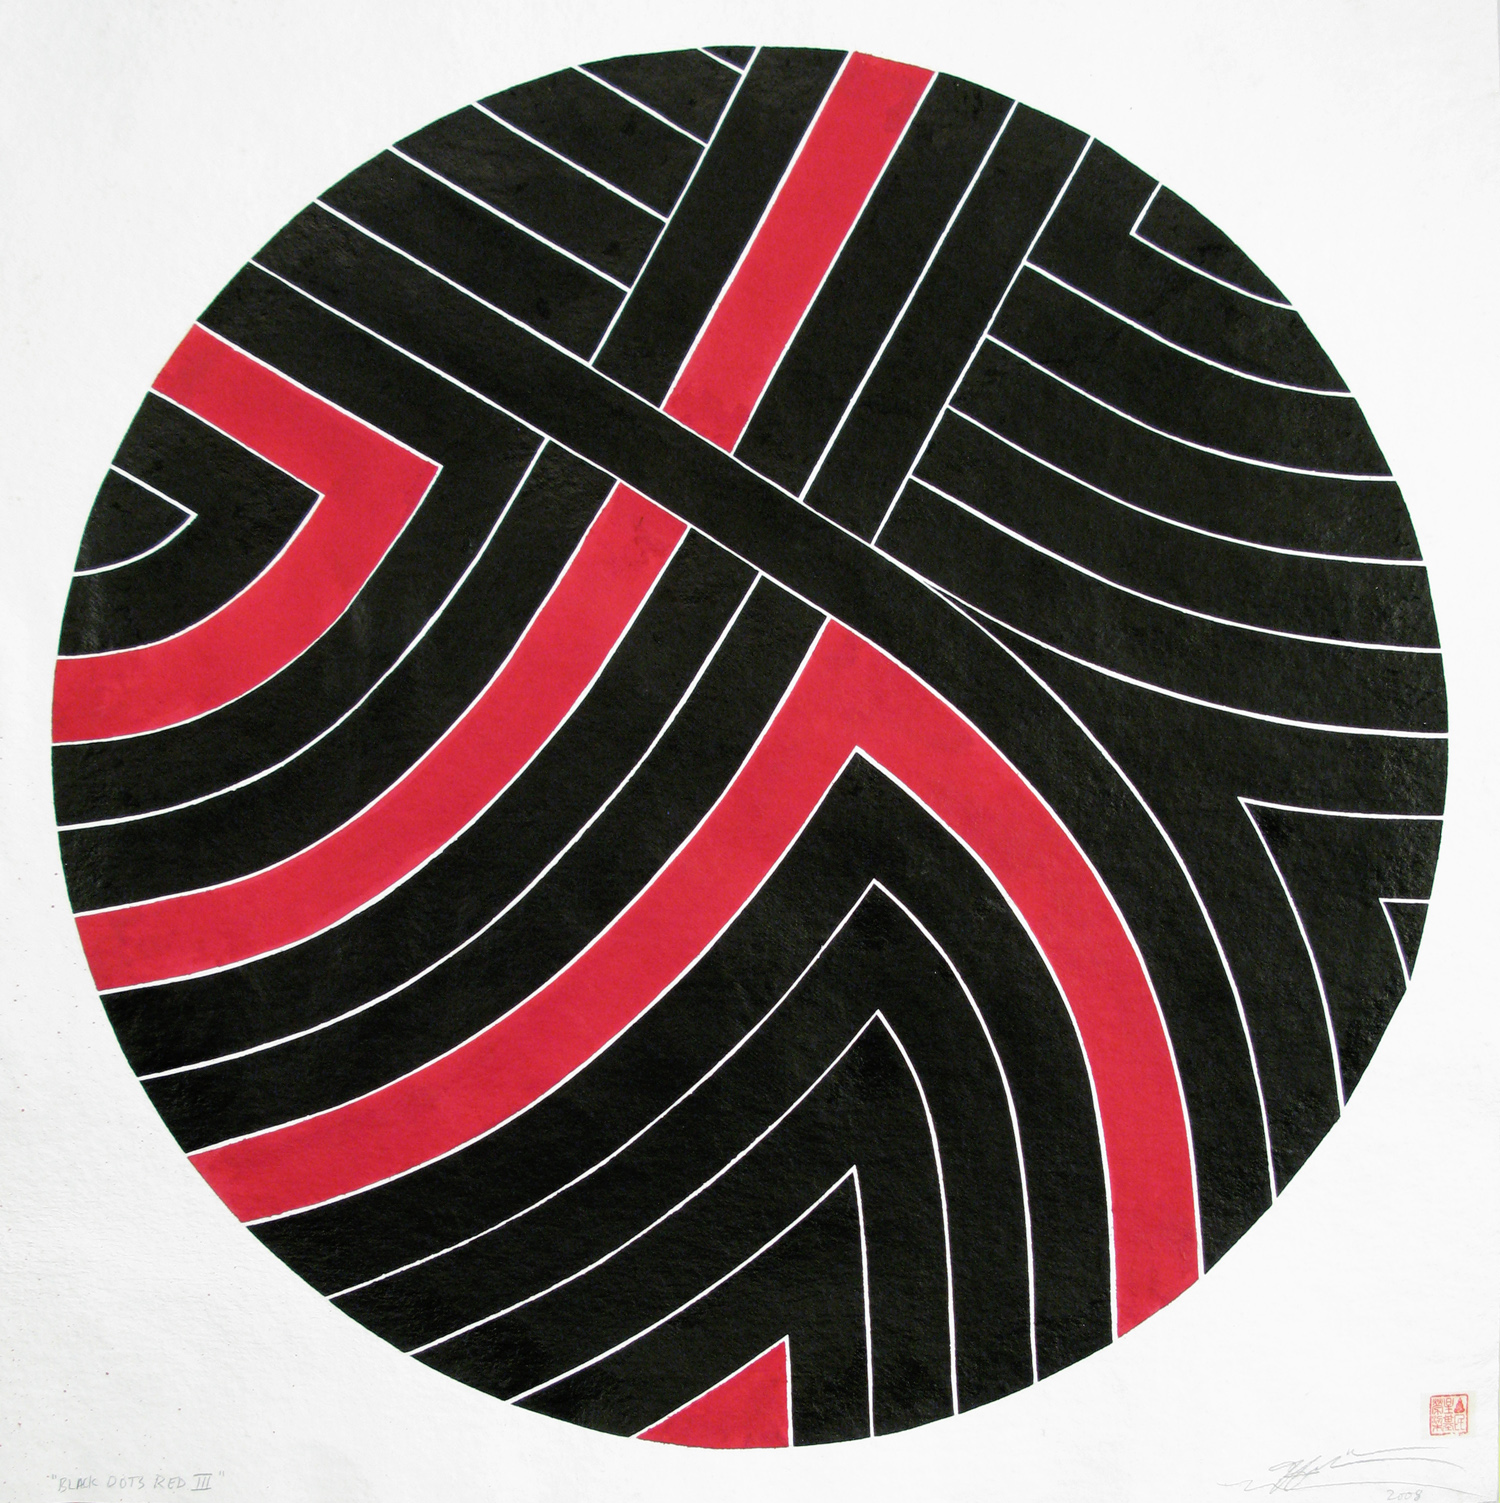  Black Dots Red III, 2008 sumi ink on handmade paper 40 x 40 inch 